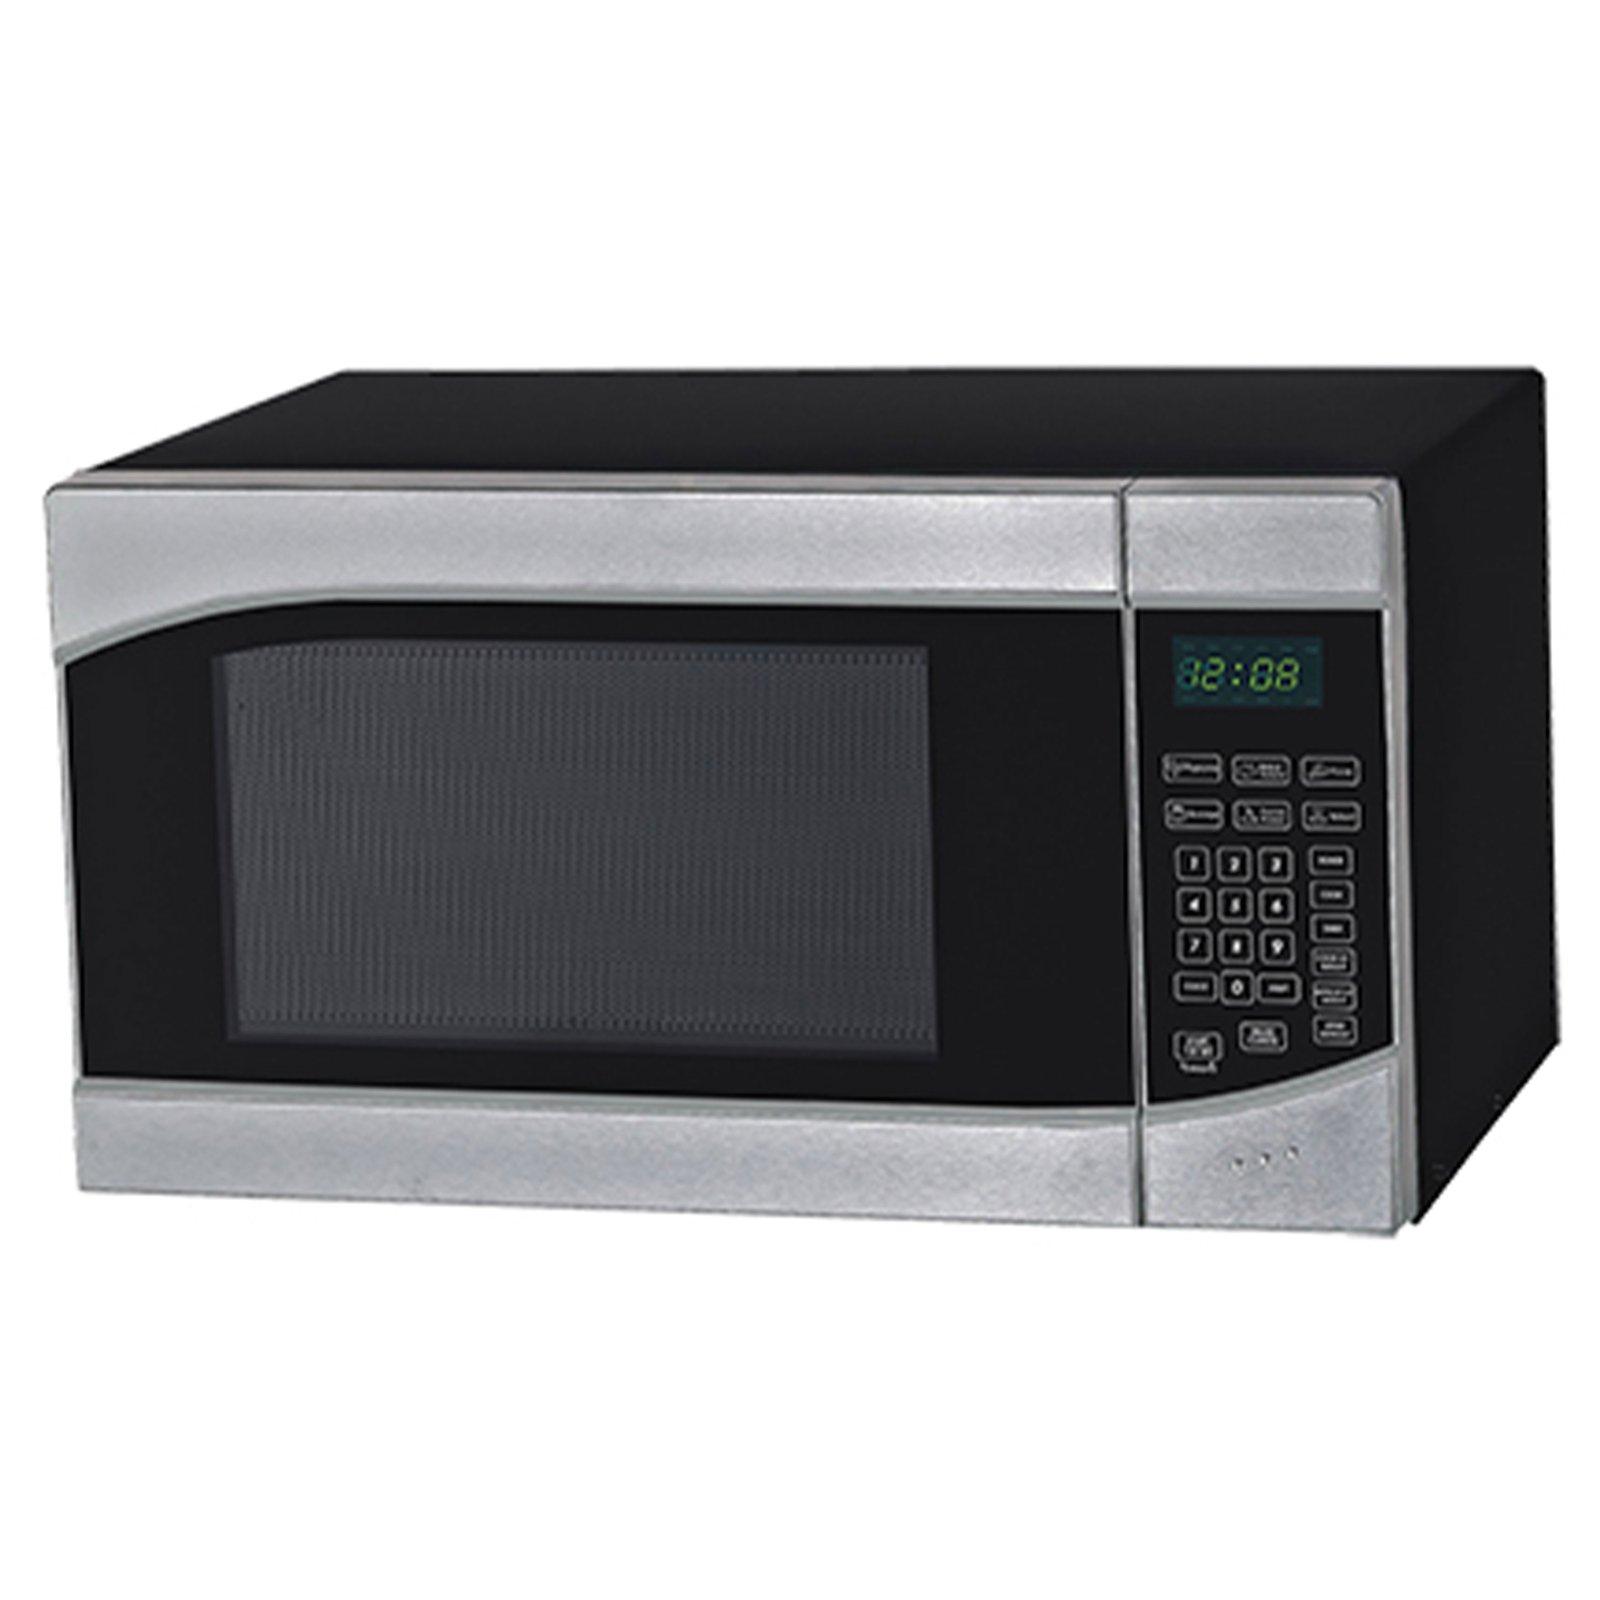 Avanti 0.9 cu. ft. Microwave Oven - Stainless Steel with Black Cabinet / 0.9 cu. ft.